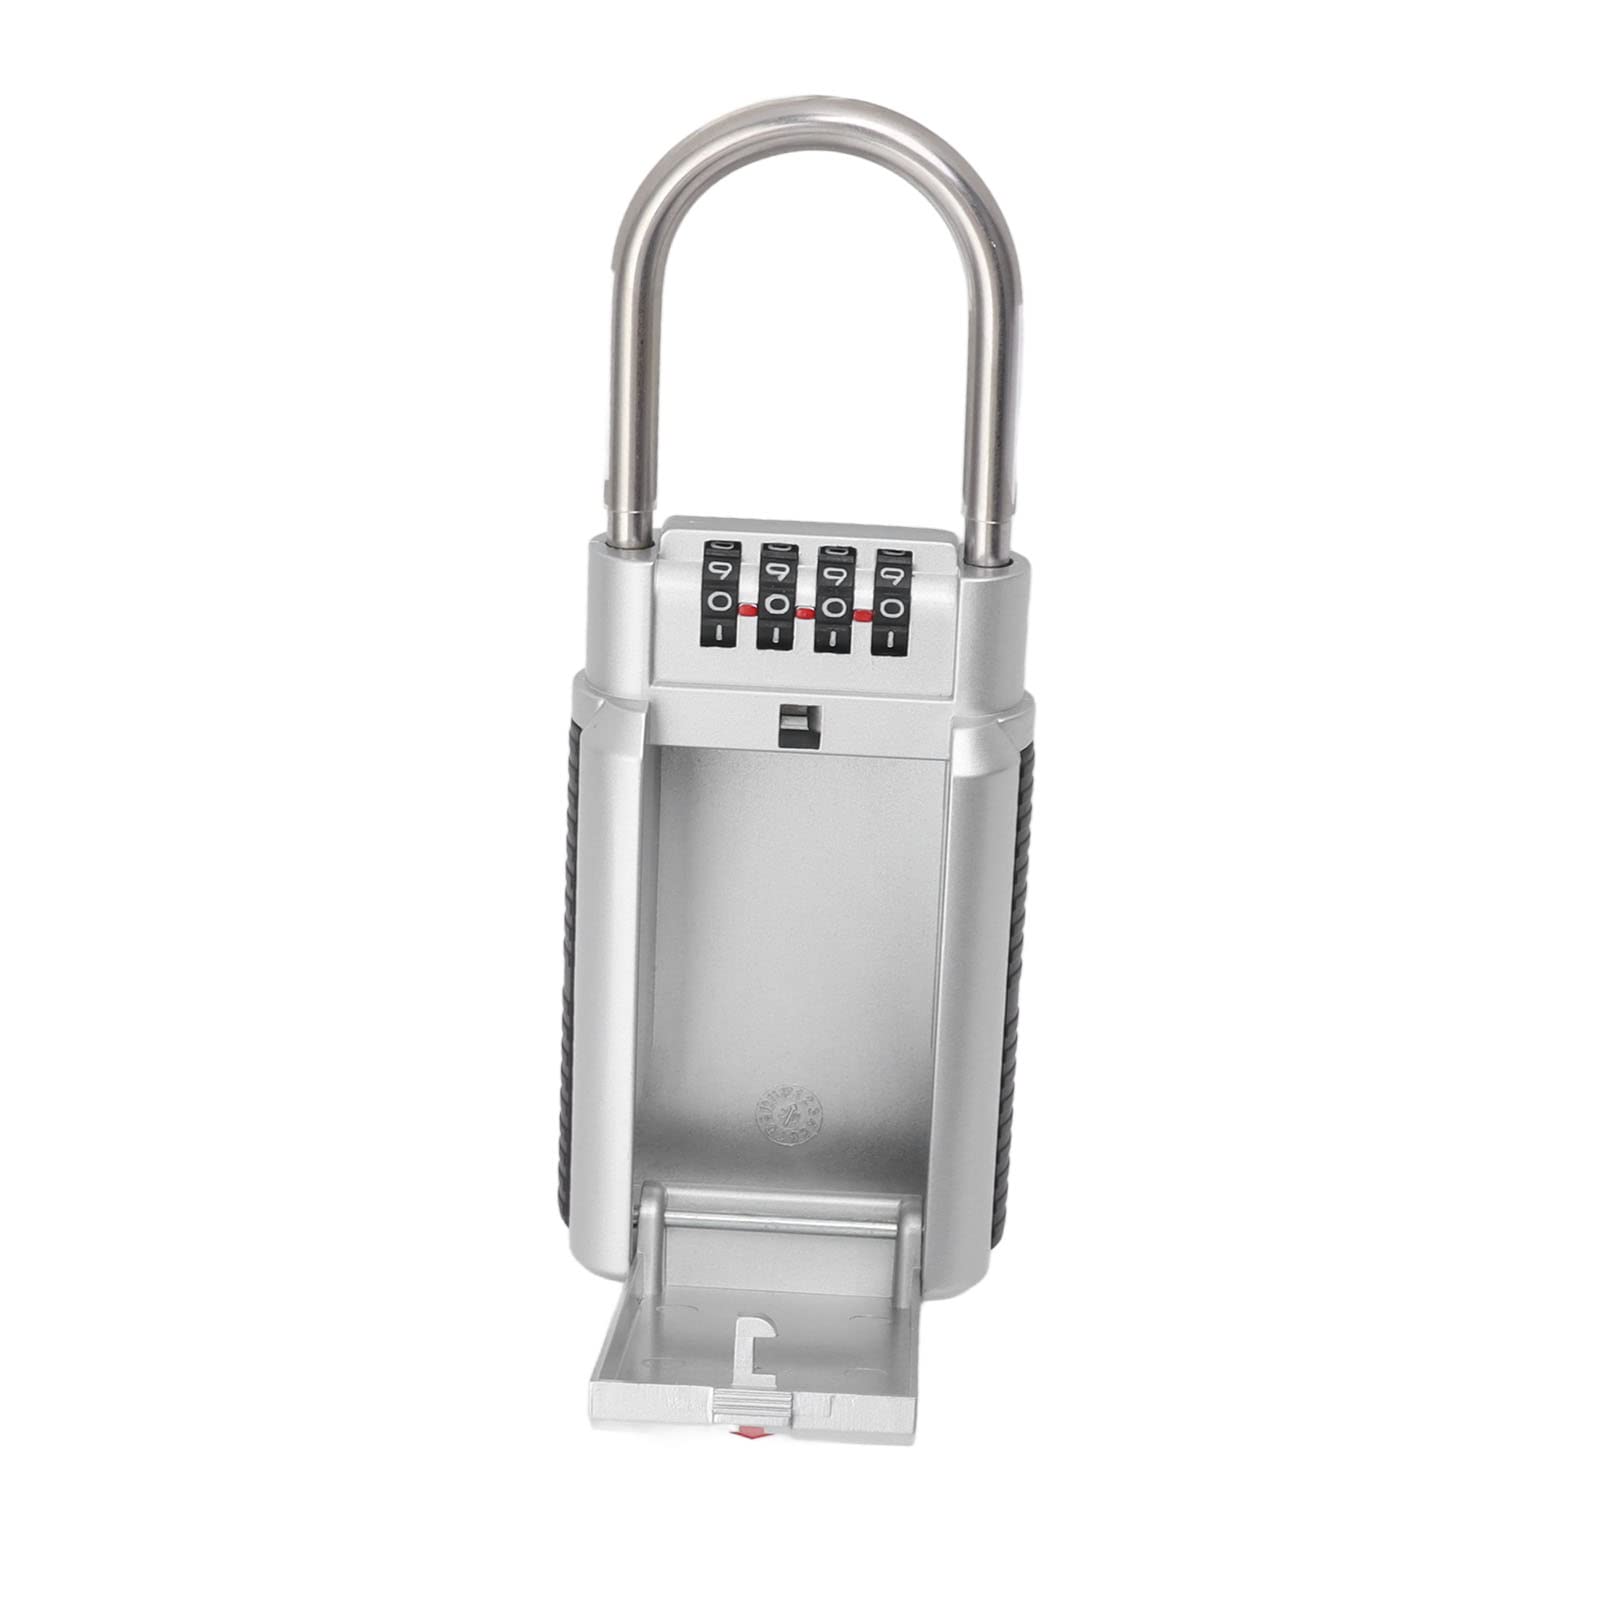 Silver safe or secure lock box